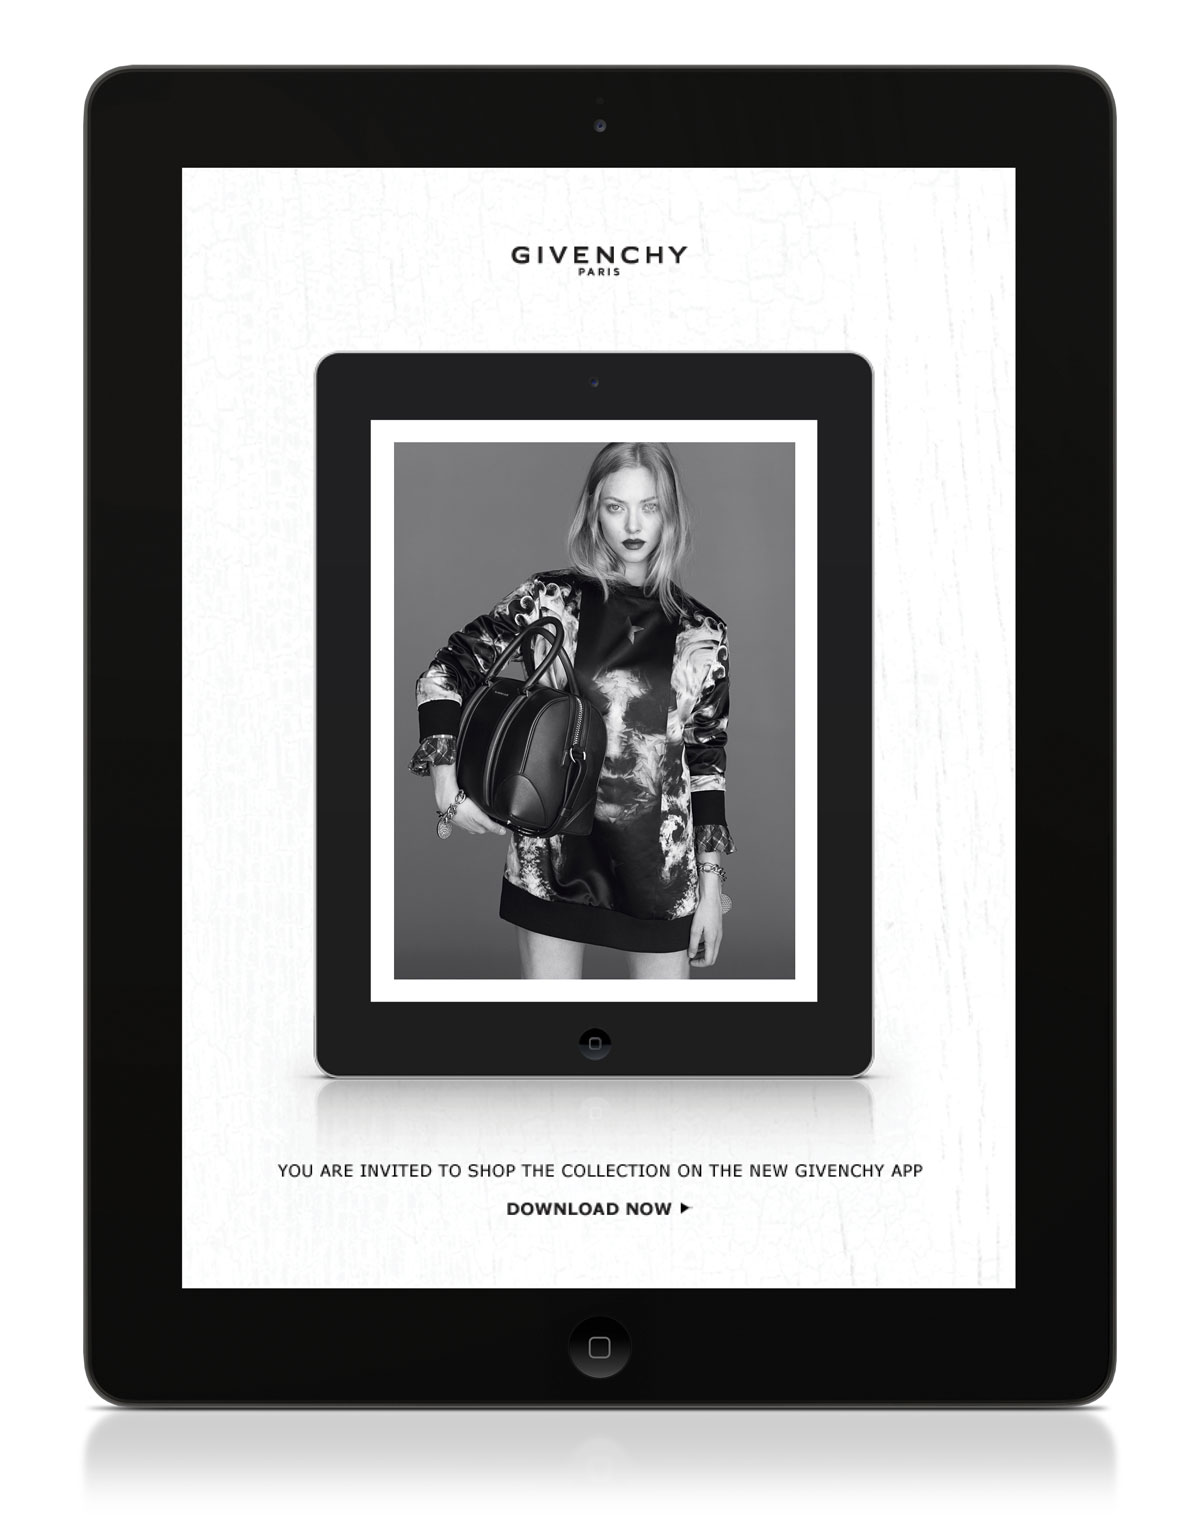 GIVENCHY’S WOMEN’S APP